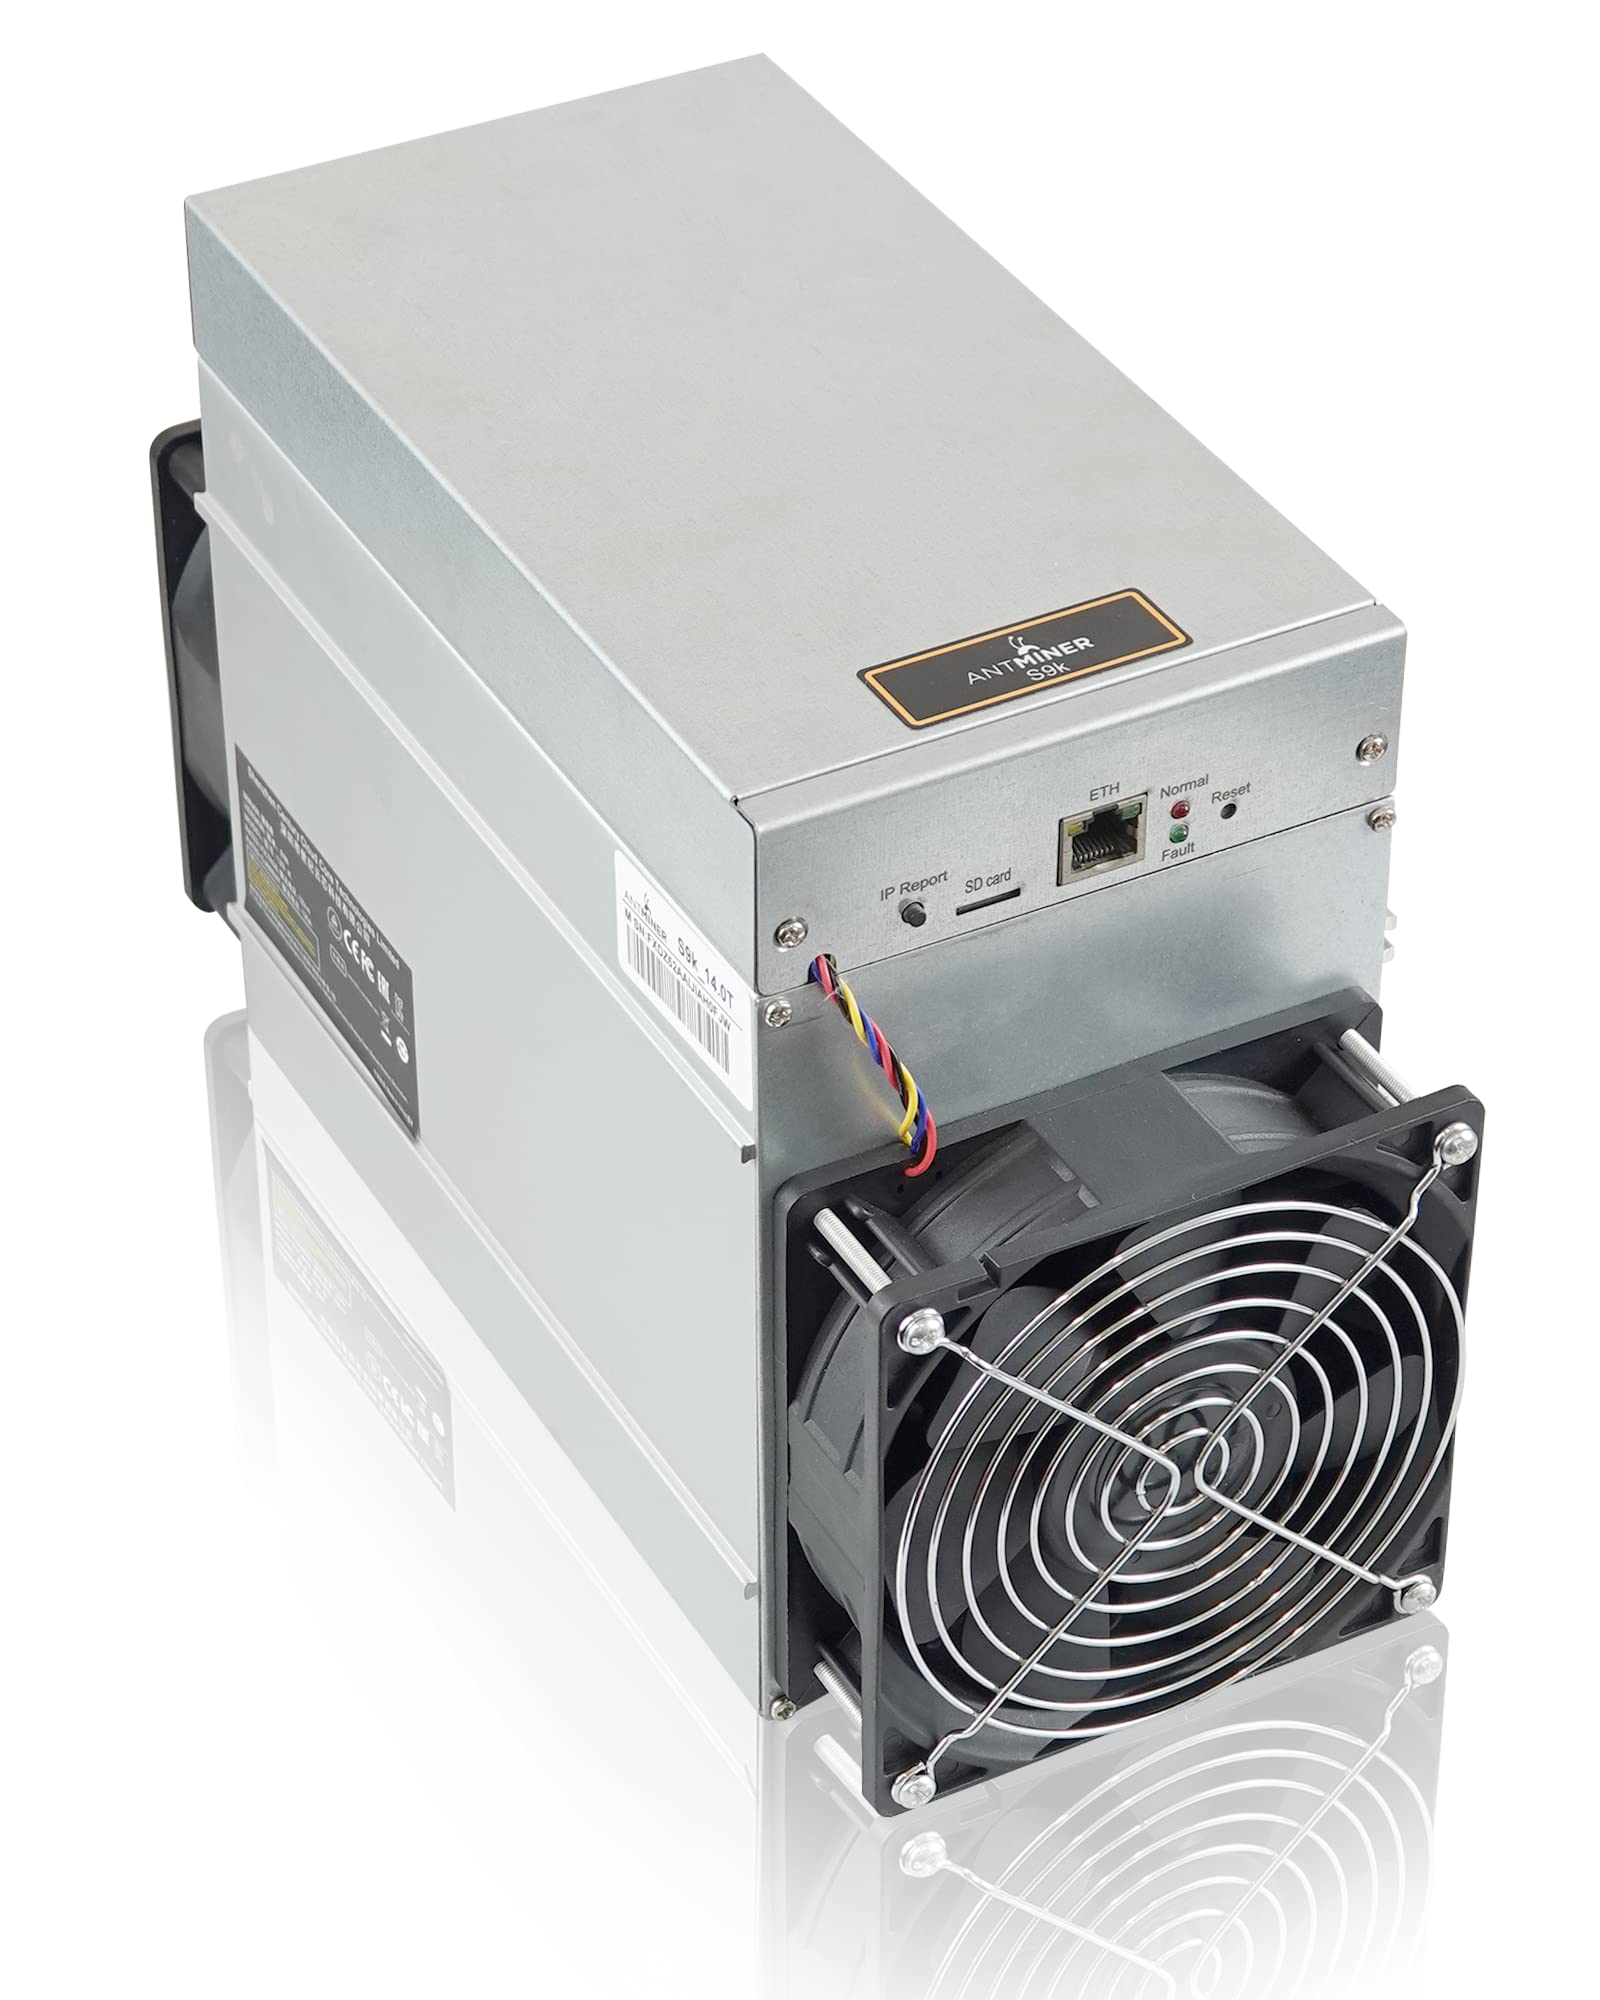 Bitmain Antminer S9k with Awesome Miner